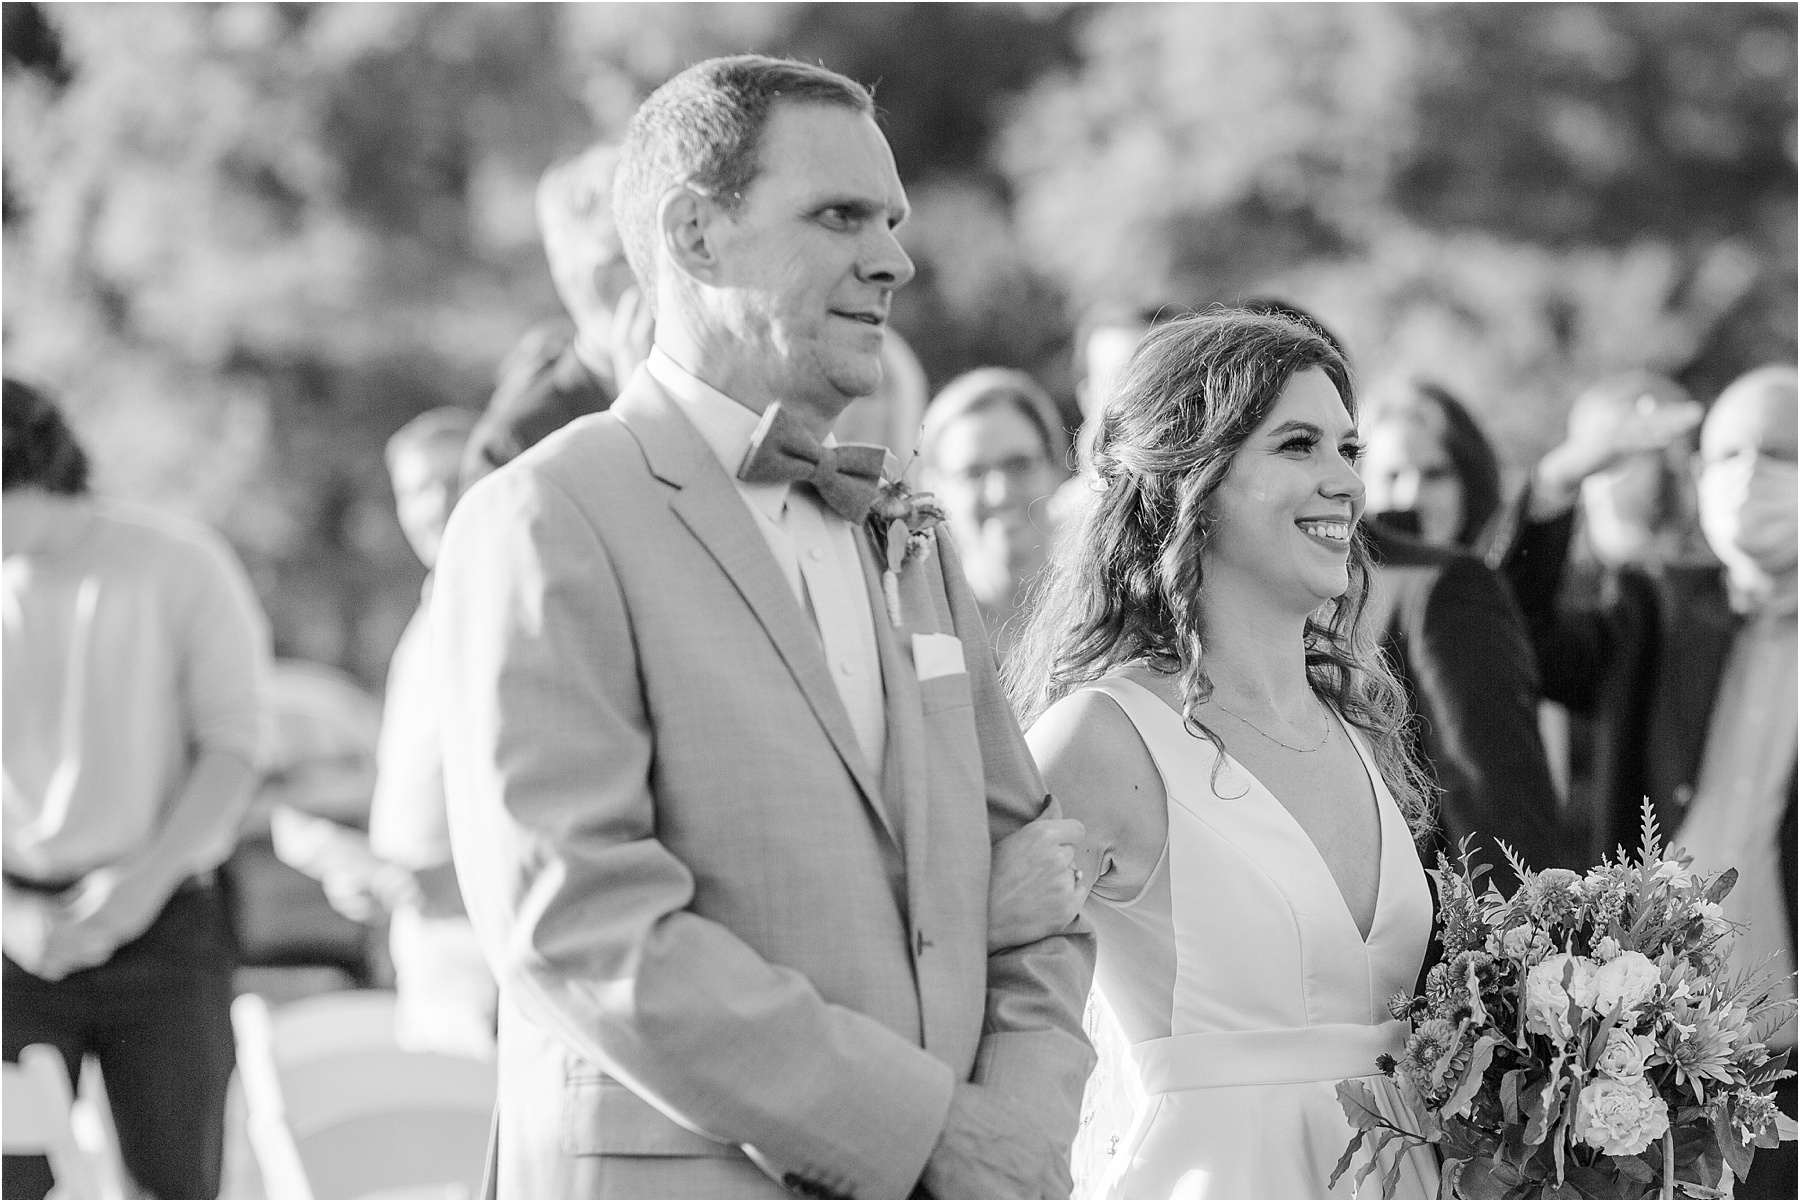 Woman in wedding dress smiles as she walks down the aisle with her dad